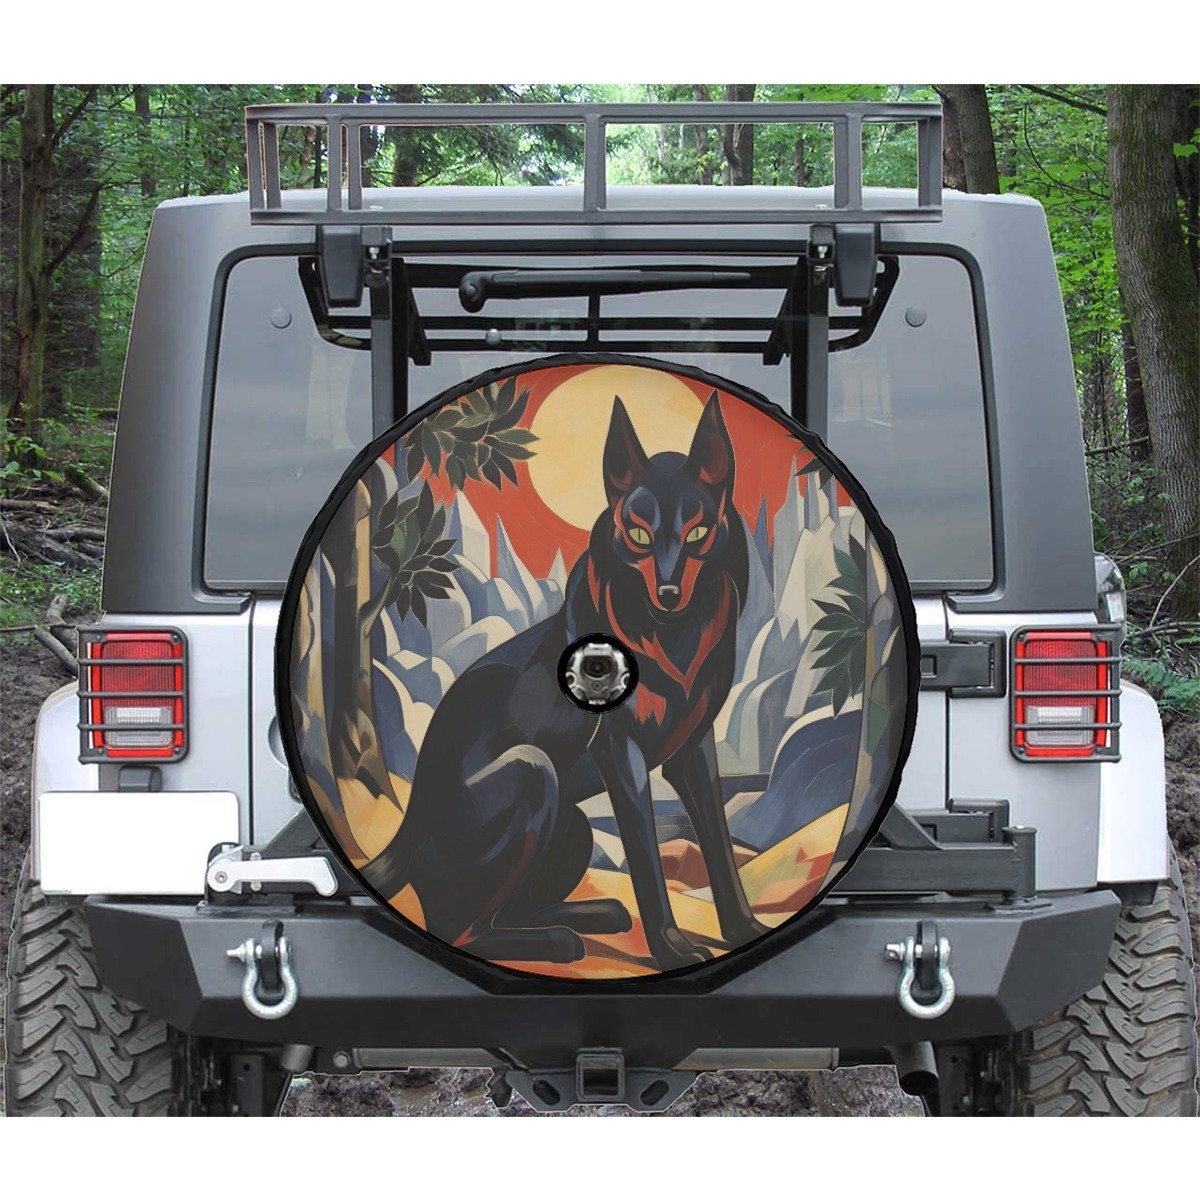 Native American Aztec Print Spare Tire Cover Wheel Protectors Universal Dust-Proof Waterproof Fit for Trailer Rv SUV Truck Camper Travel Trailer 17 in - 3